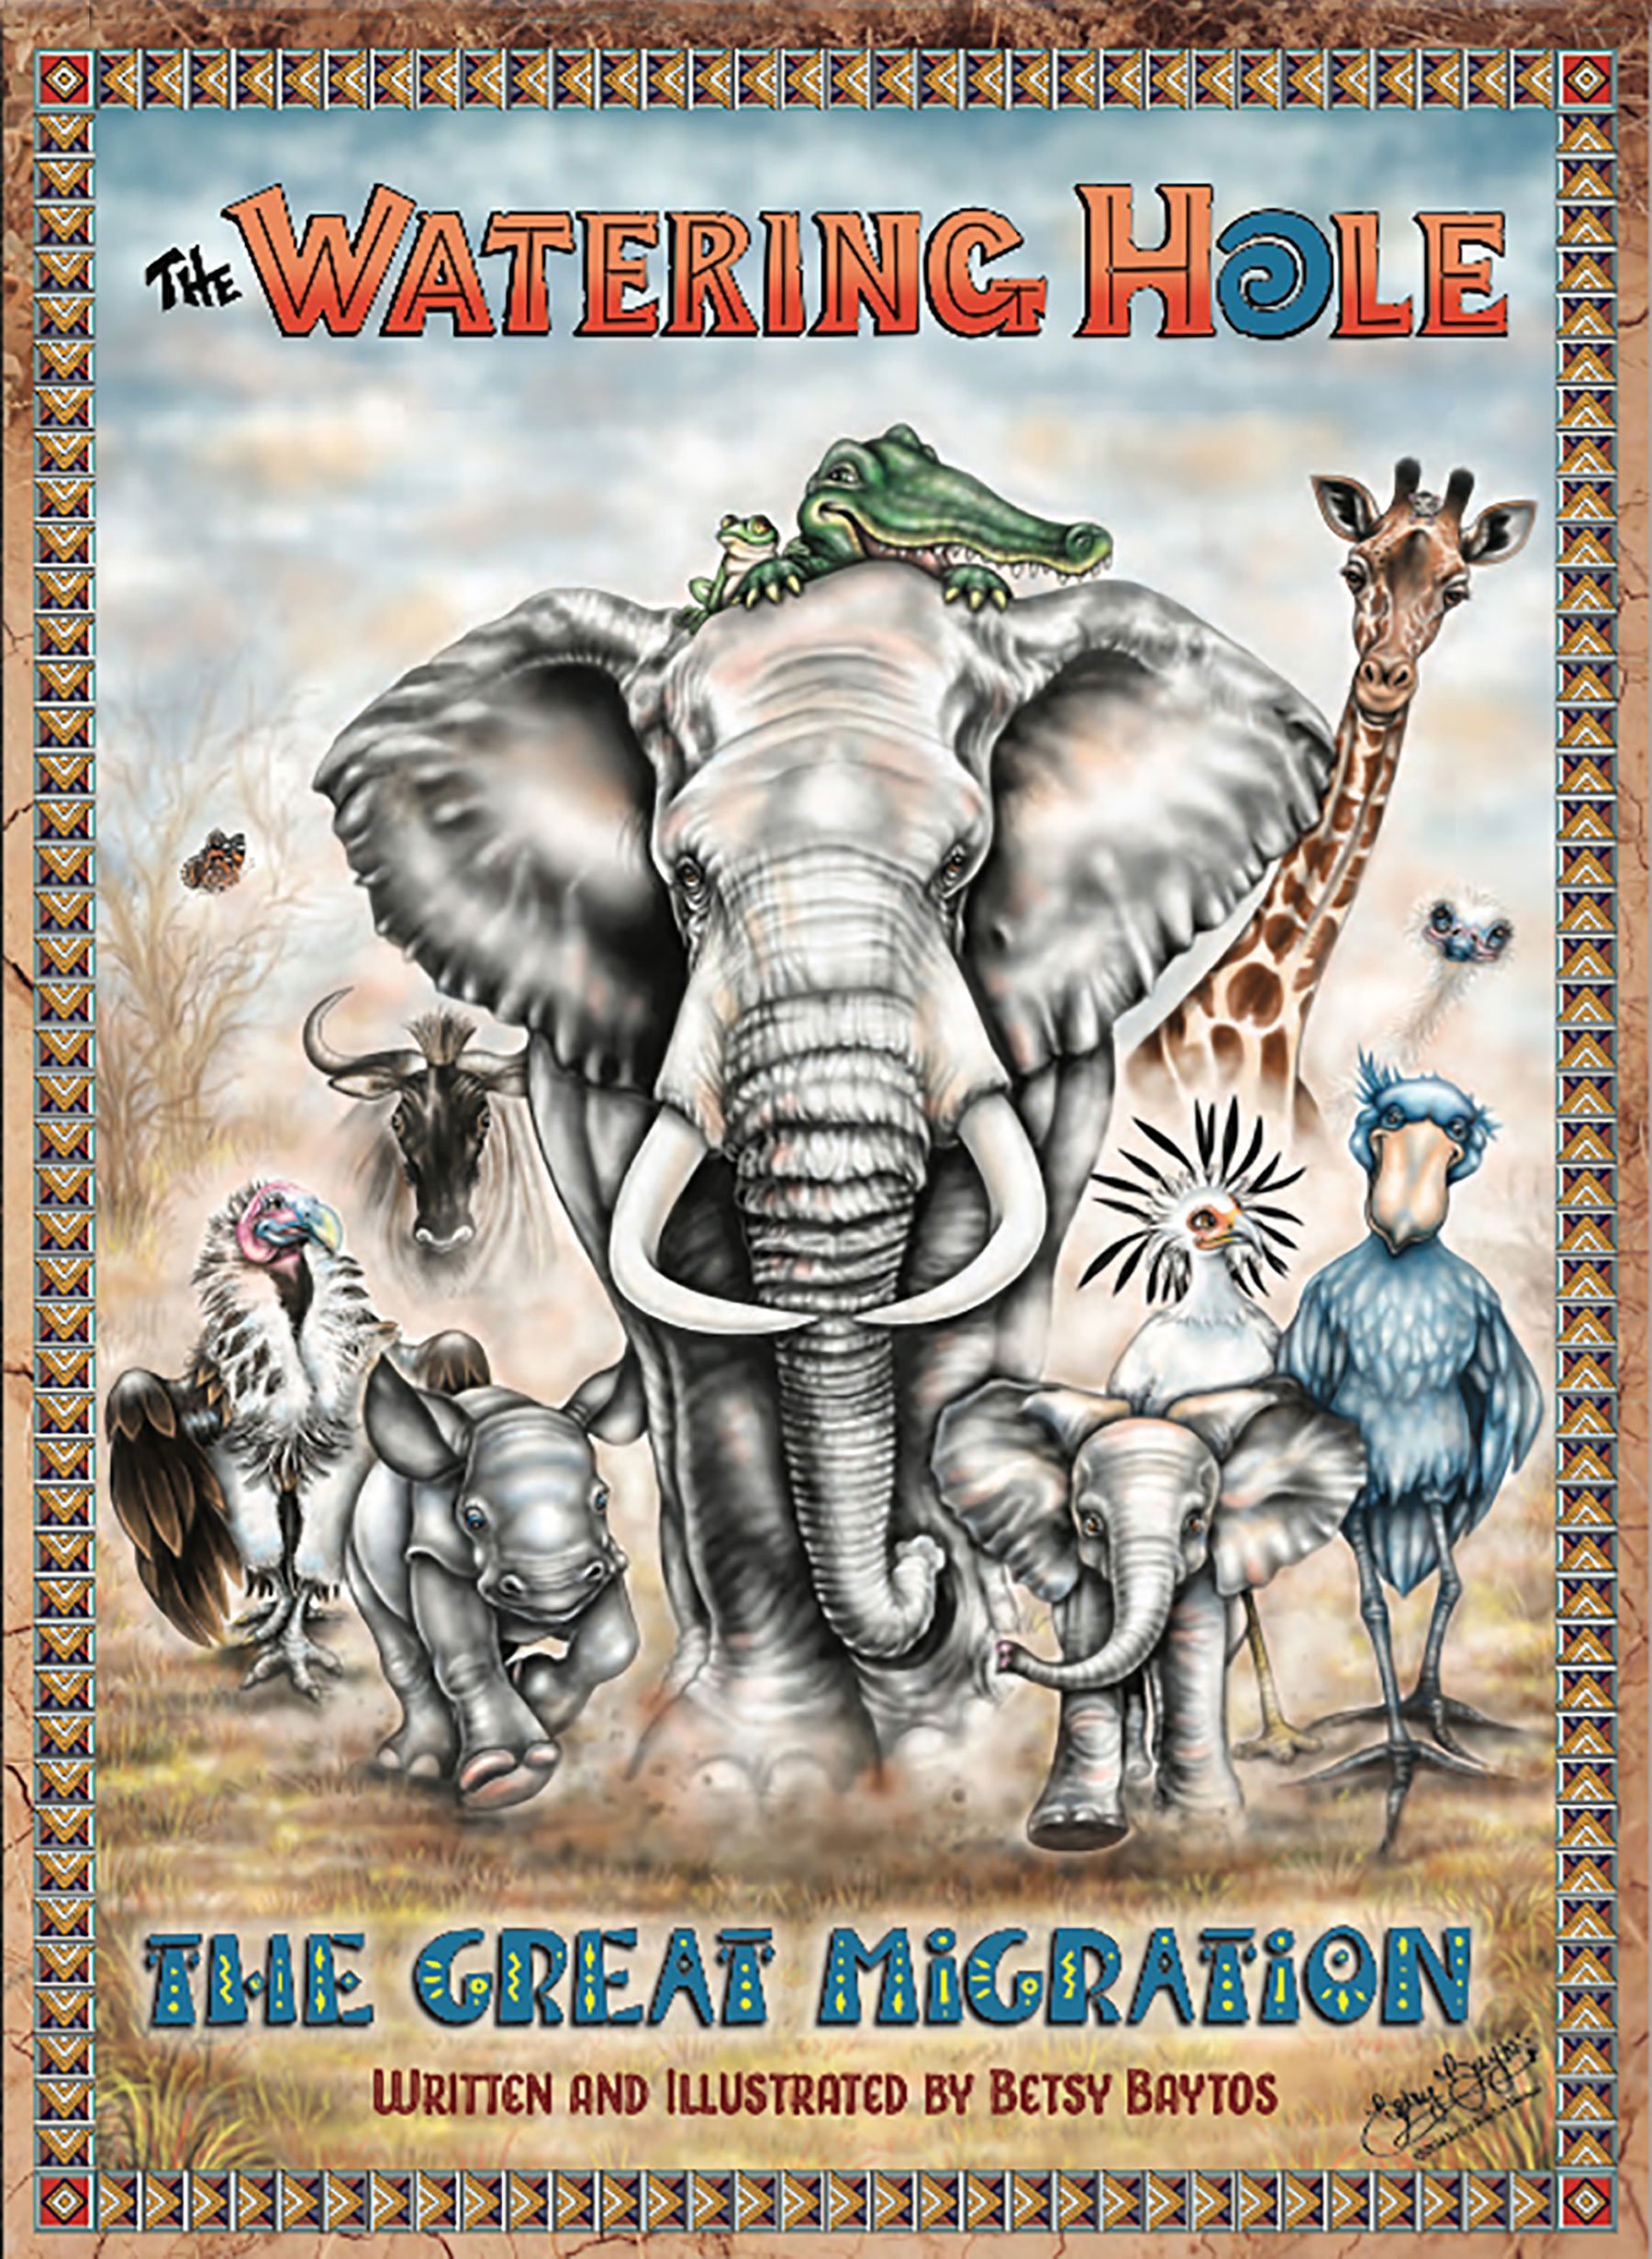 'The Watering Hole' Book Series